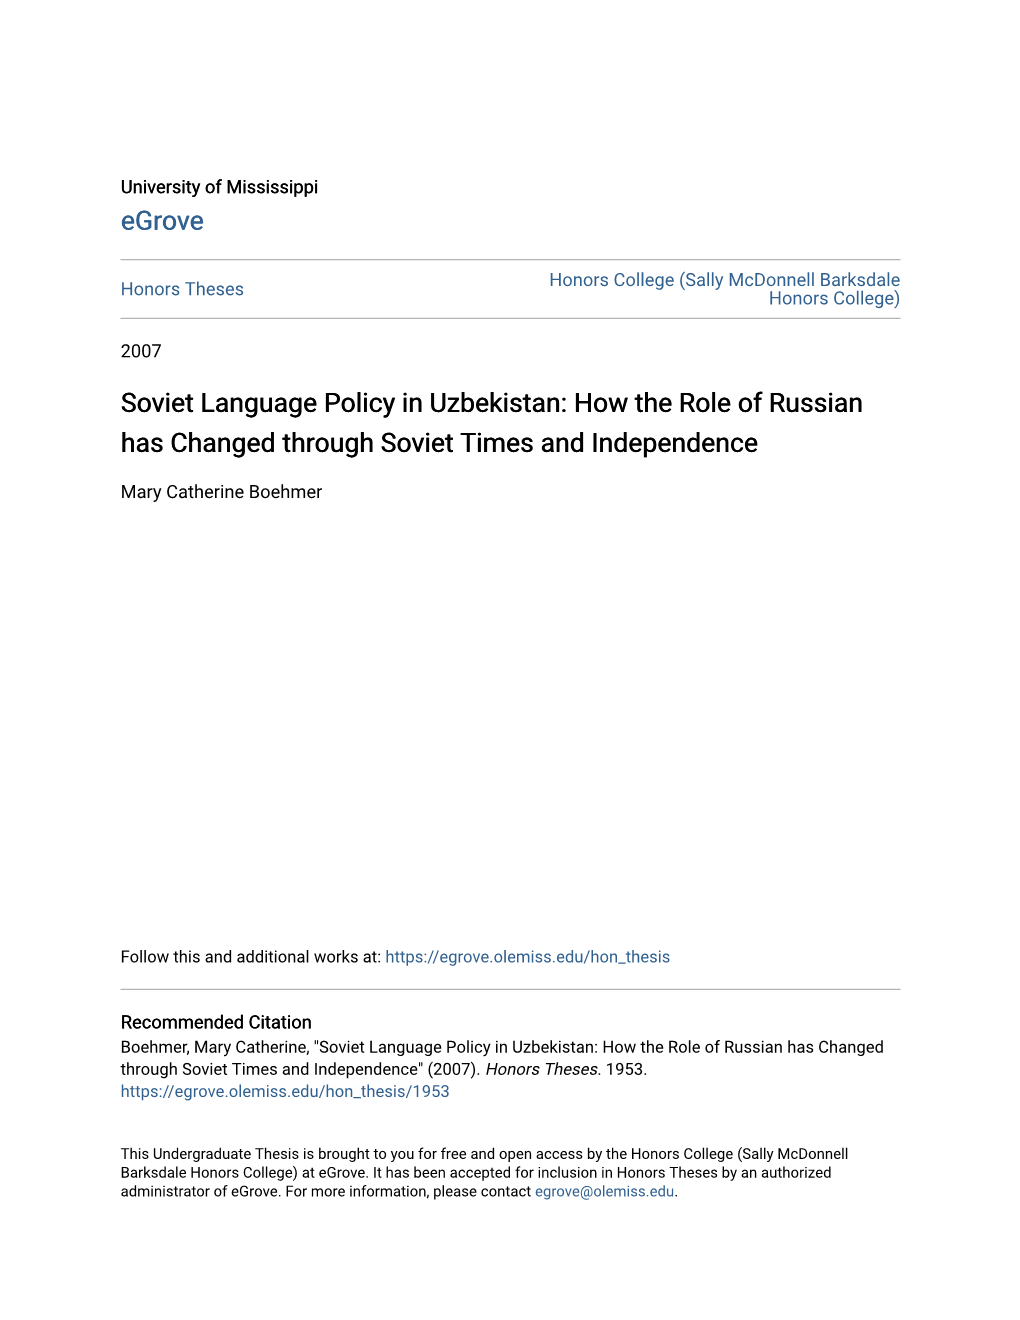 Soviet Language Policy in Uzbekistan: How the Role of Russian Has Changed Through Soviet Times and Independence